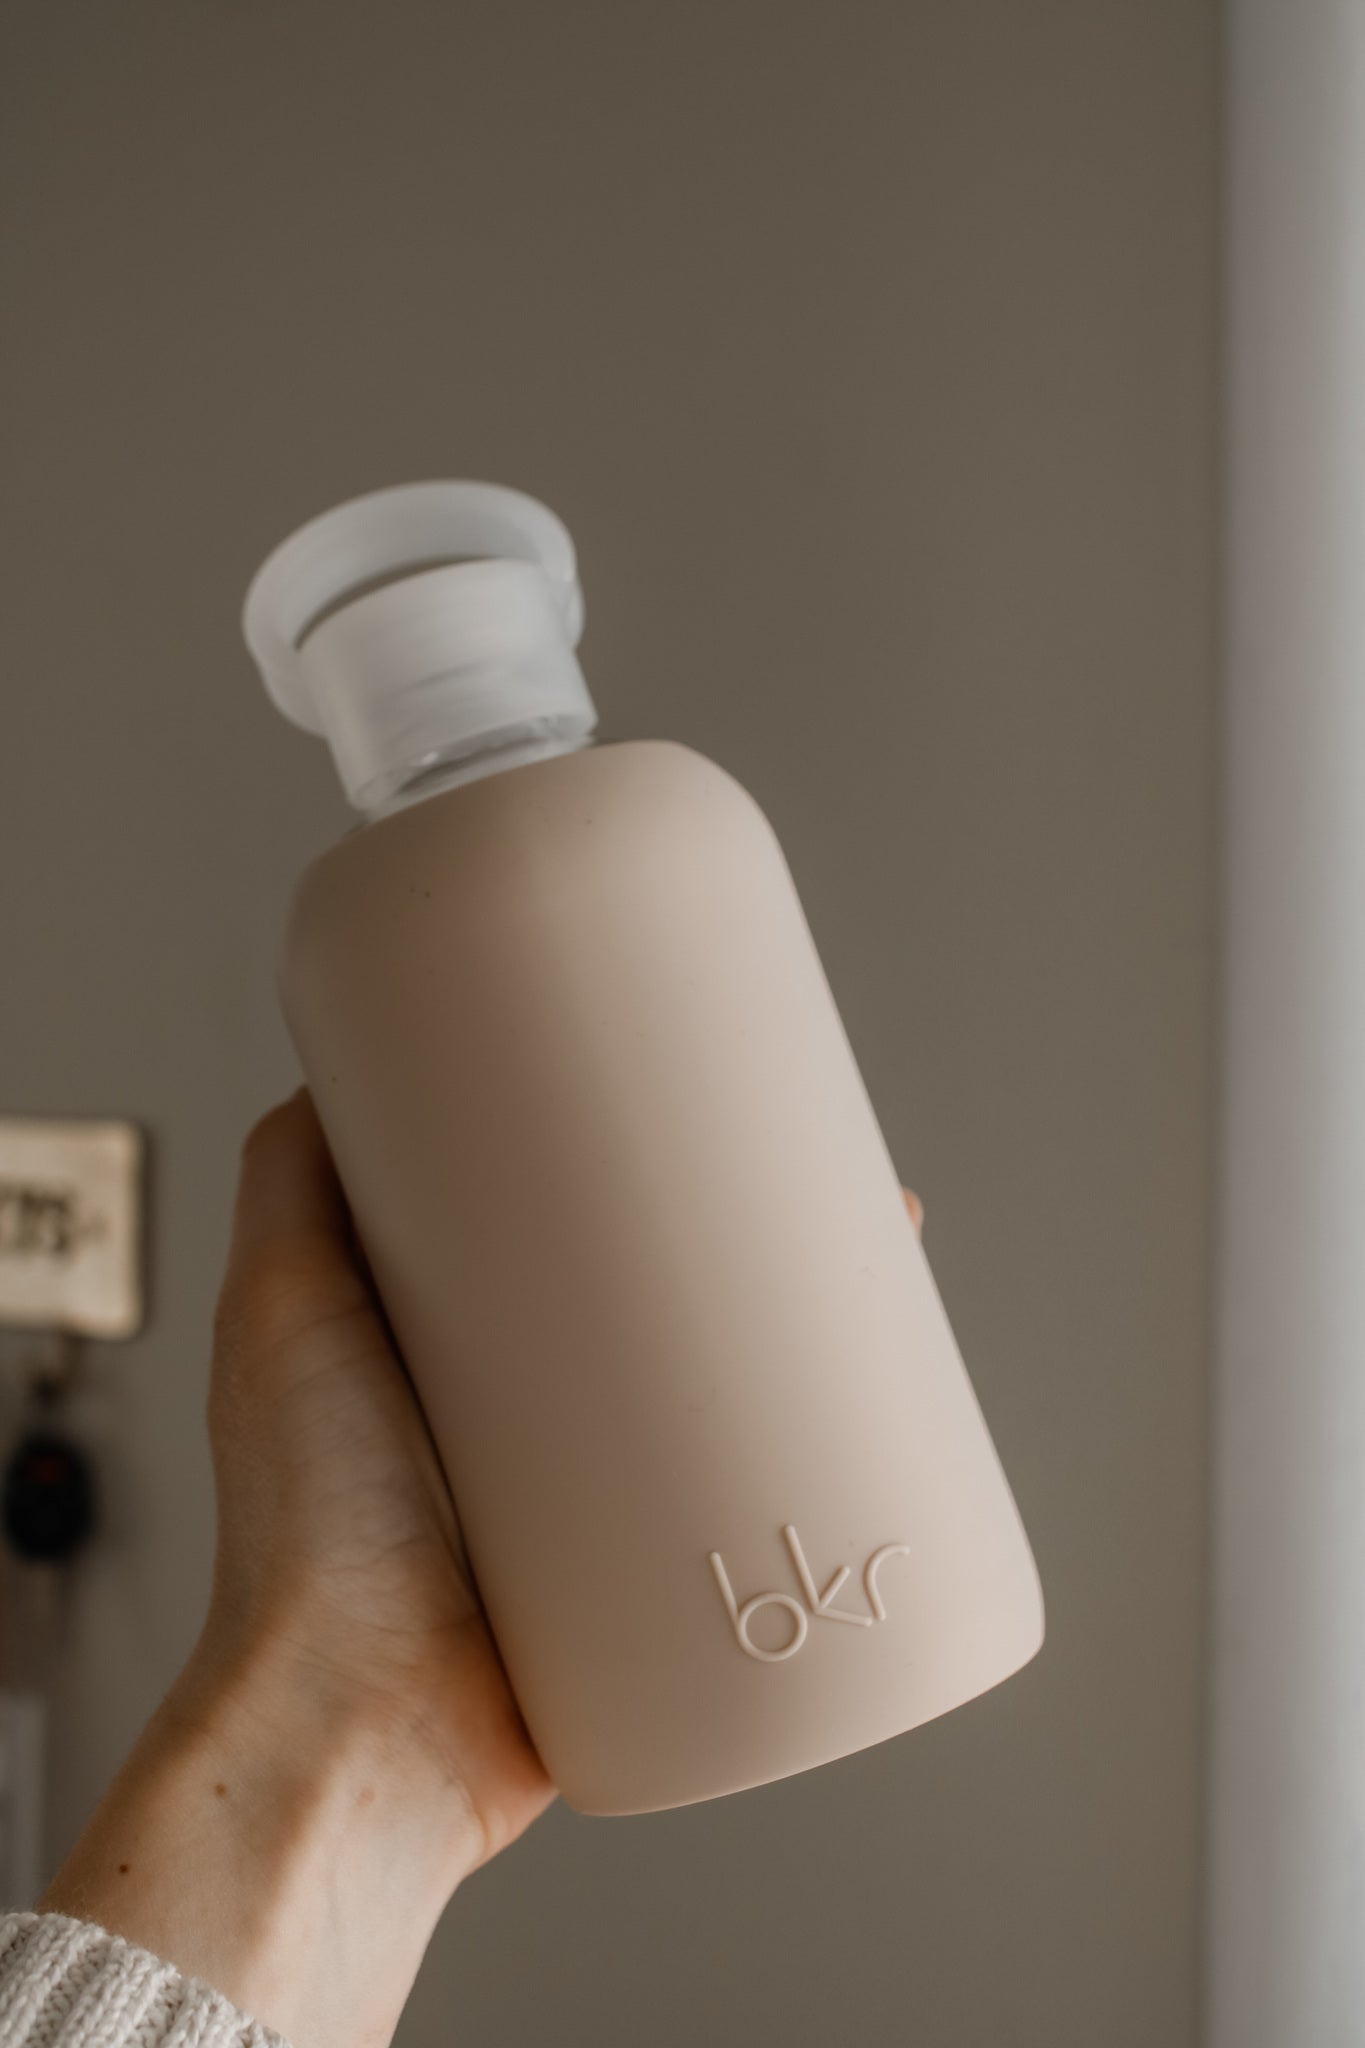 Bkr review: Is the glass water bottle worth it? - Reviewed